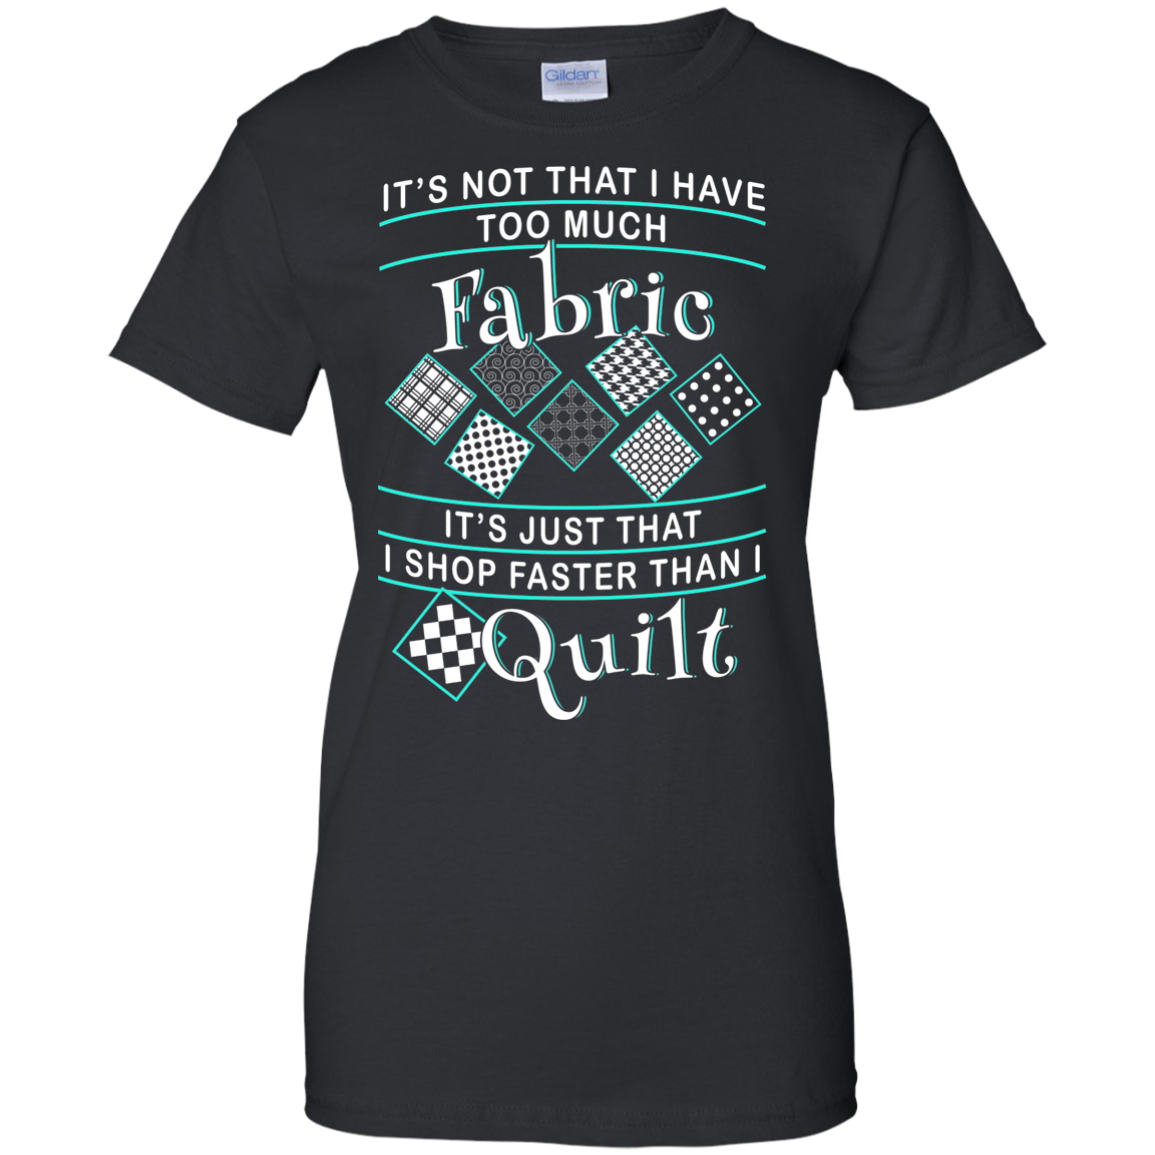 I Shop Faster than I Quilt Ladies Custom 100% Cotton T-Shirt - Crafter4Life - 2